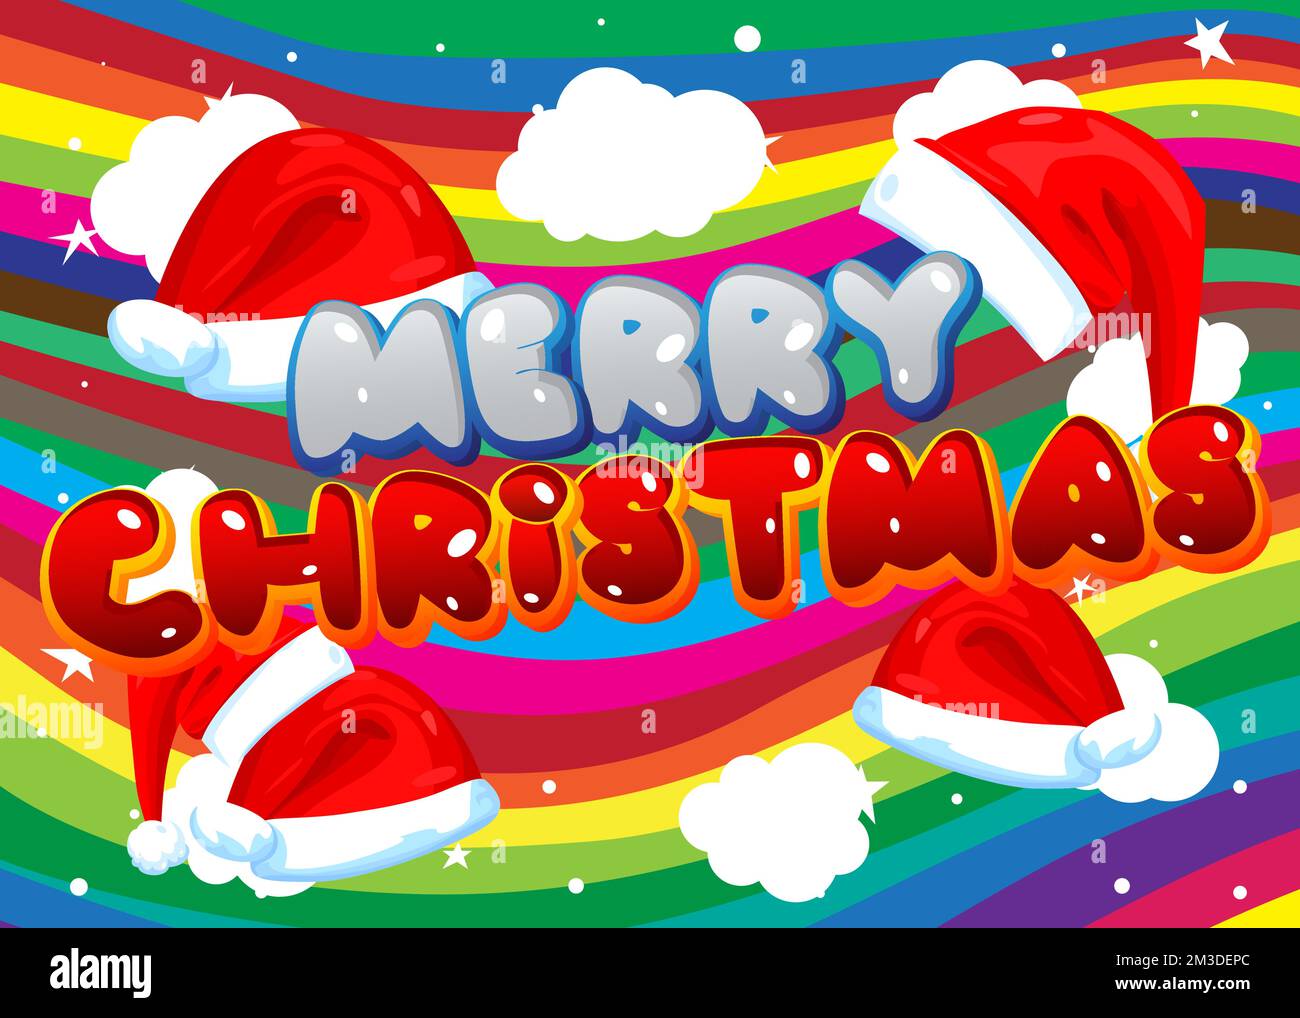 Merry Christmas. Word written with Children's font in cartoon style. Stock Vector